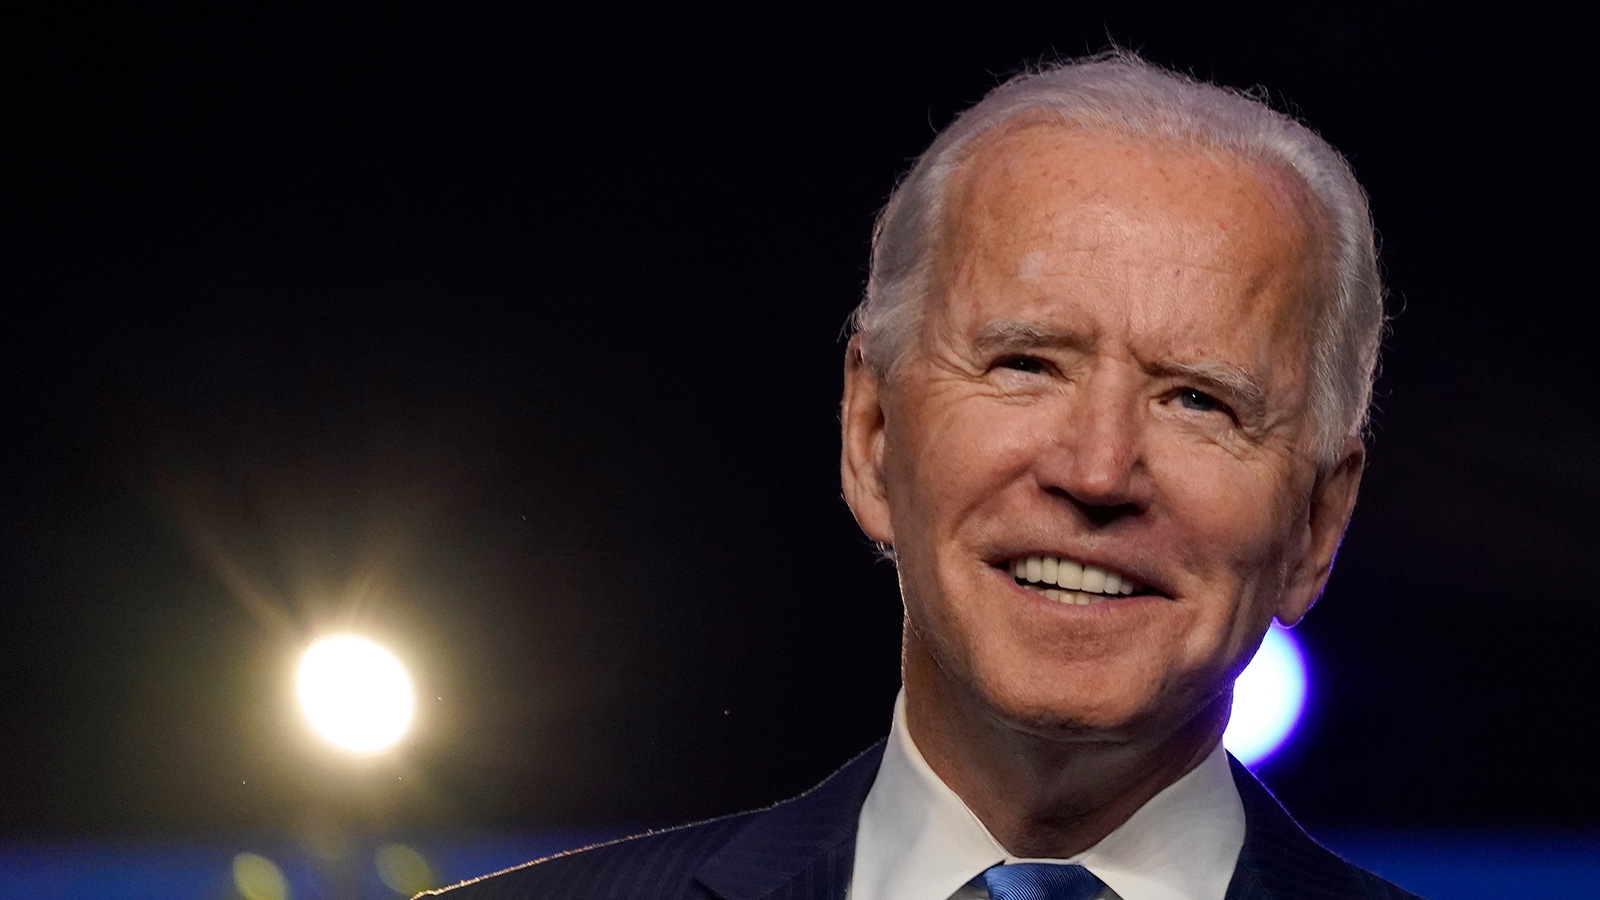 Mr. Biden was declared elected, the oldest president in American history